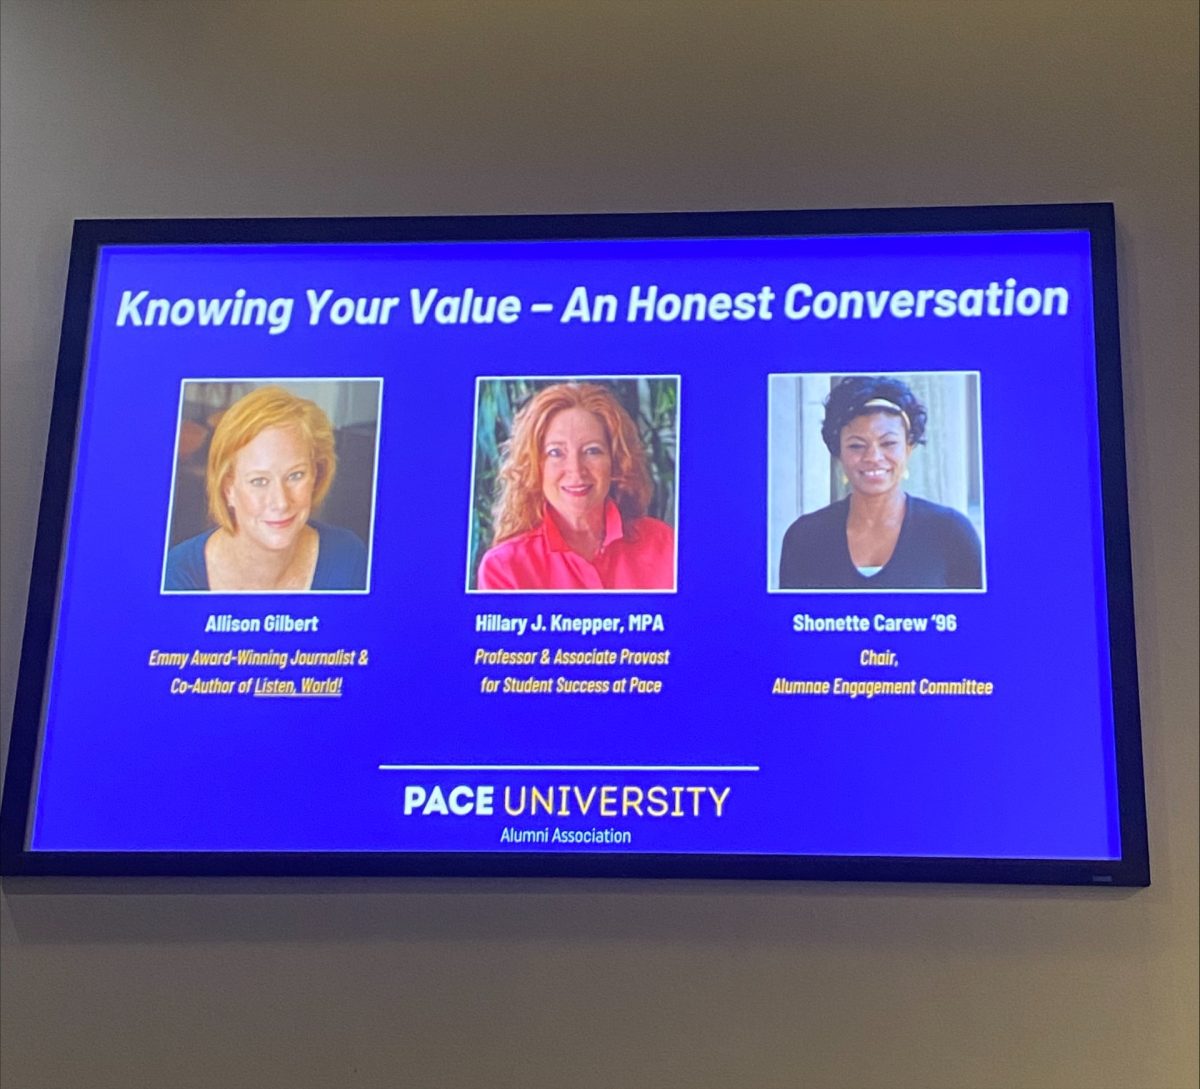 Graphic from the event featuring author Allison Gilbert, Q&A Host Professor Hillary J. Knapper, and Chair of the Alumnae Engagement Committee Shonette Carew.